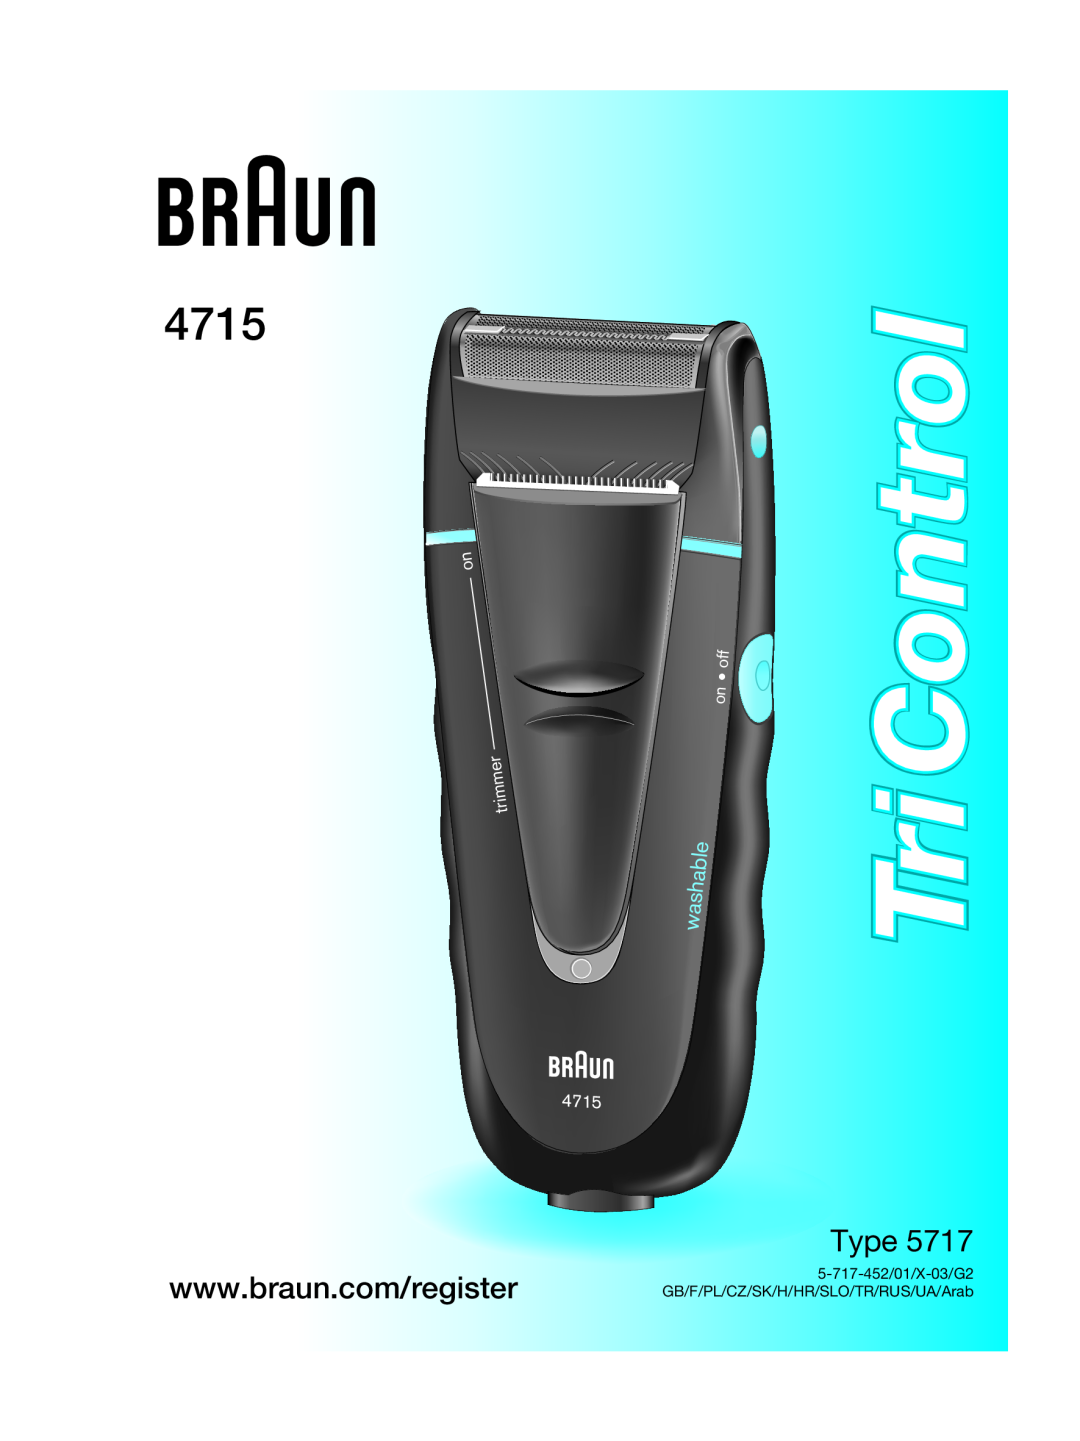 Braun Type 5717 manual Tri Control, 4715, washable, trimmer, off on, 5-717-452/01/X-03/G2 